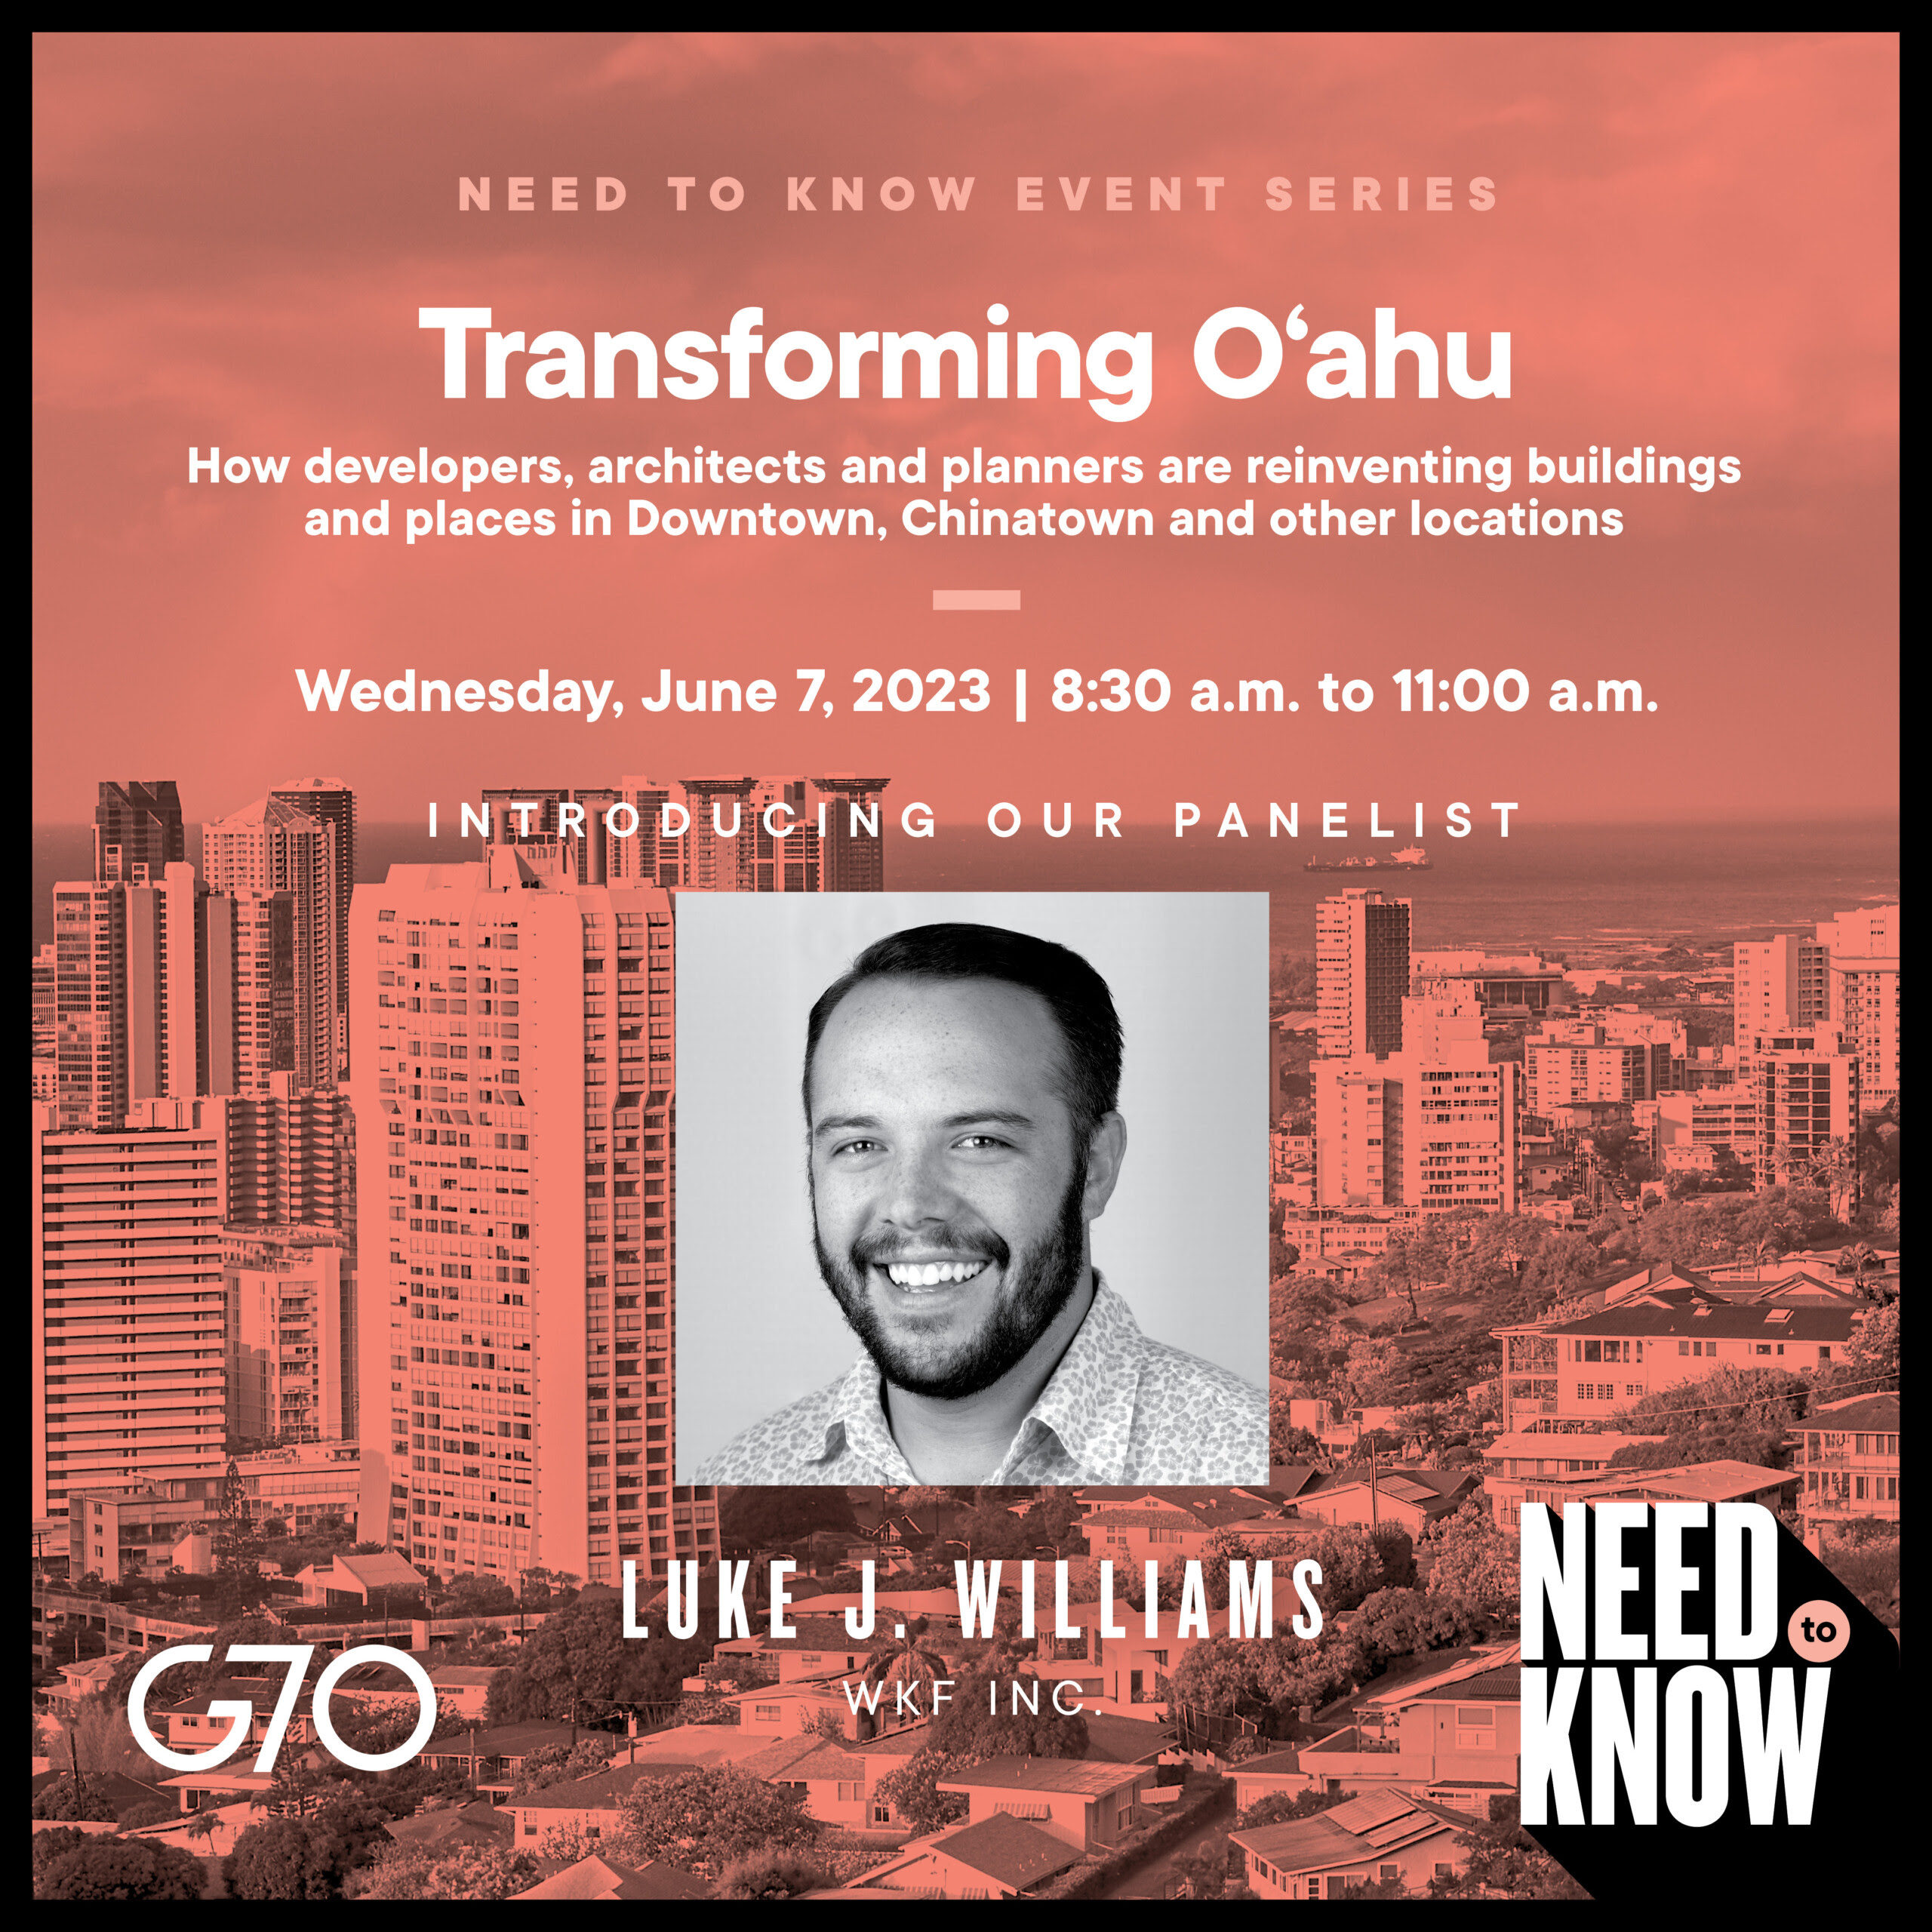 Click here to register for Need to Know: Transforming O'ahu on Wednesday, June 7 at Fuller Hall, YWCA!